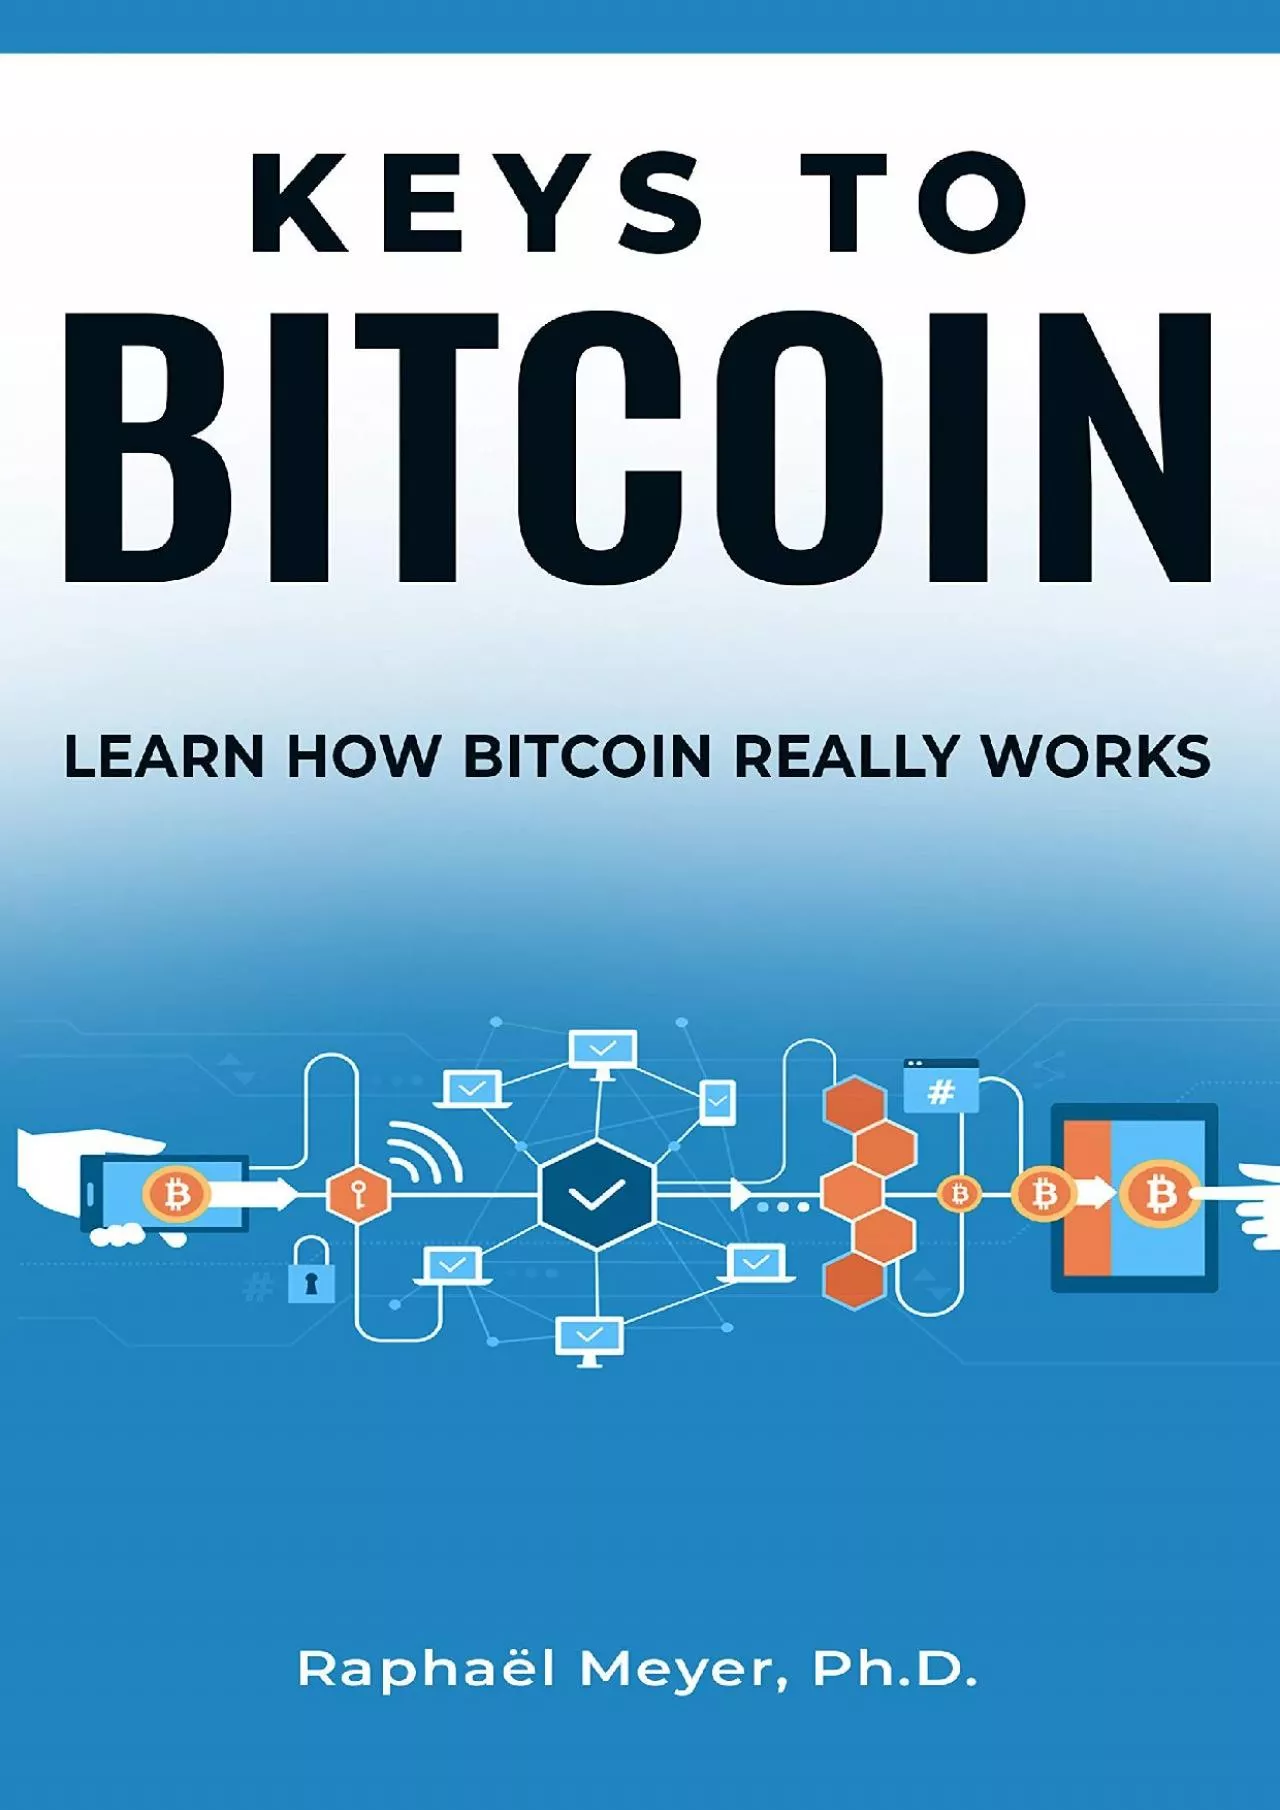 (DOWNLOAD)-KEYS TO BITCOIN: LEARN HOW BITCOIN REALLY WORKS